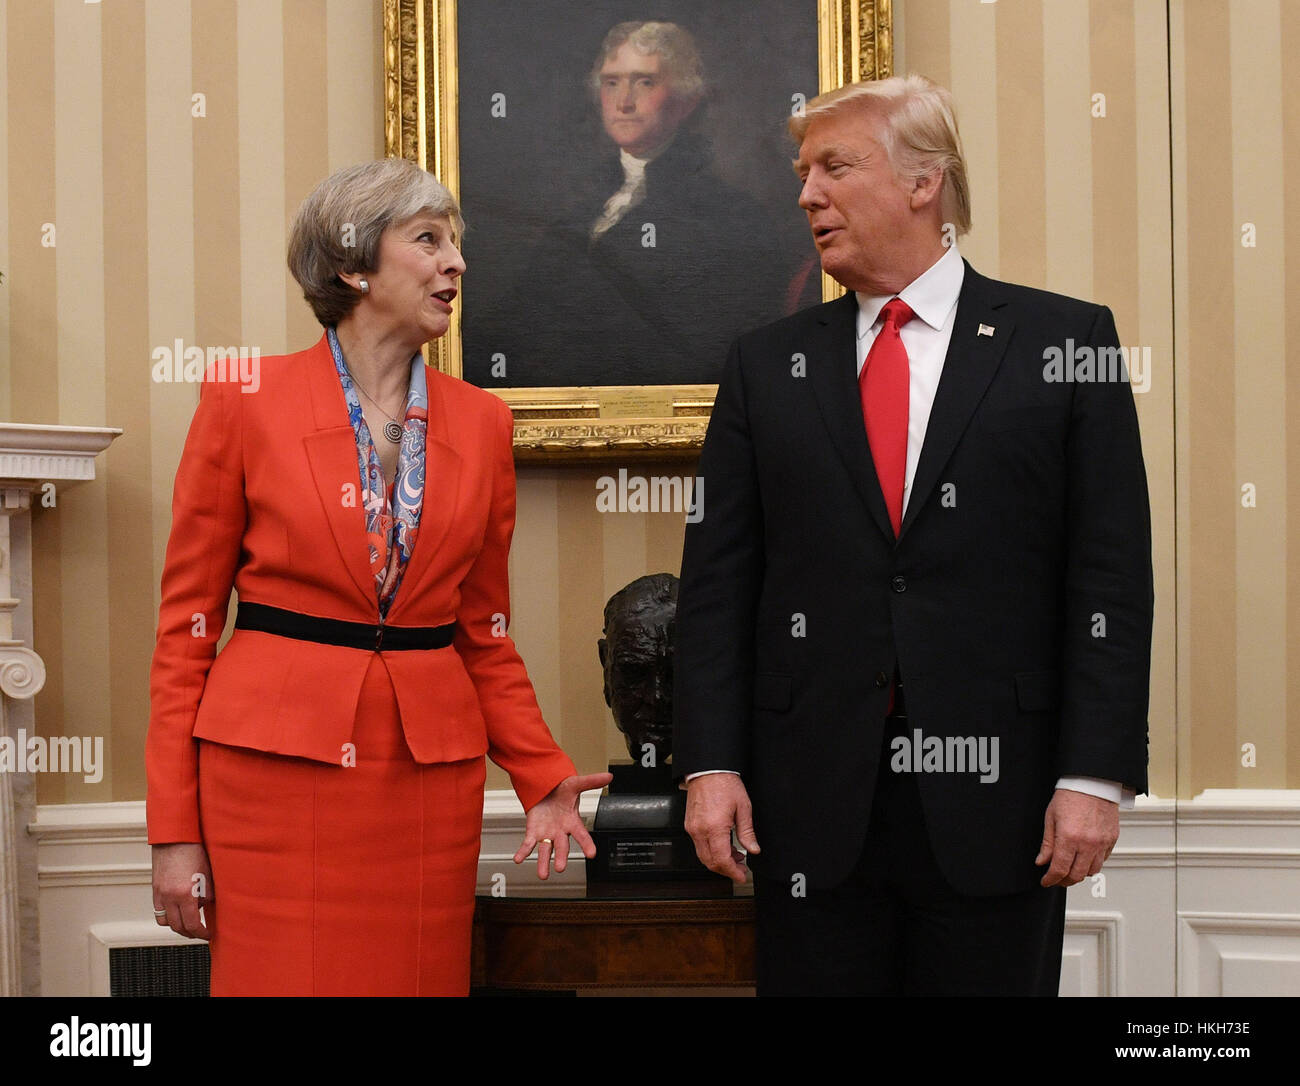 Prime Minister Theresa May meeting US President Donald Trump in the Oval Office of the White House, Washington DC, USA. Stock Photo